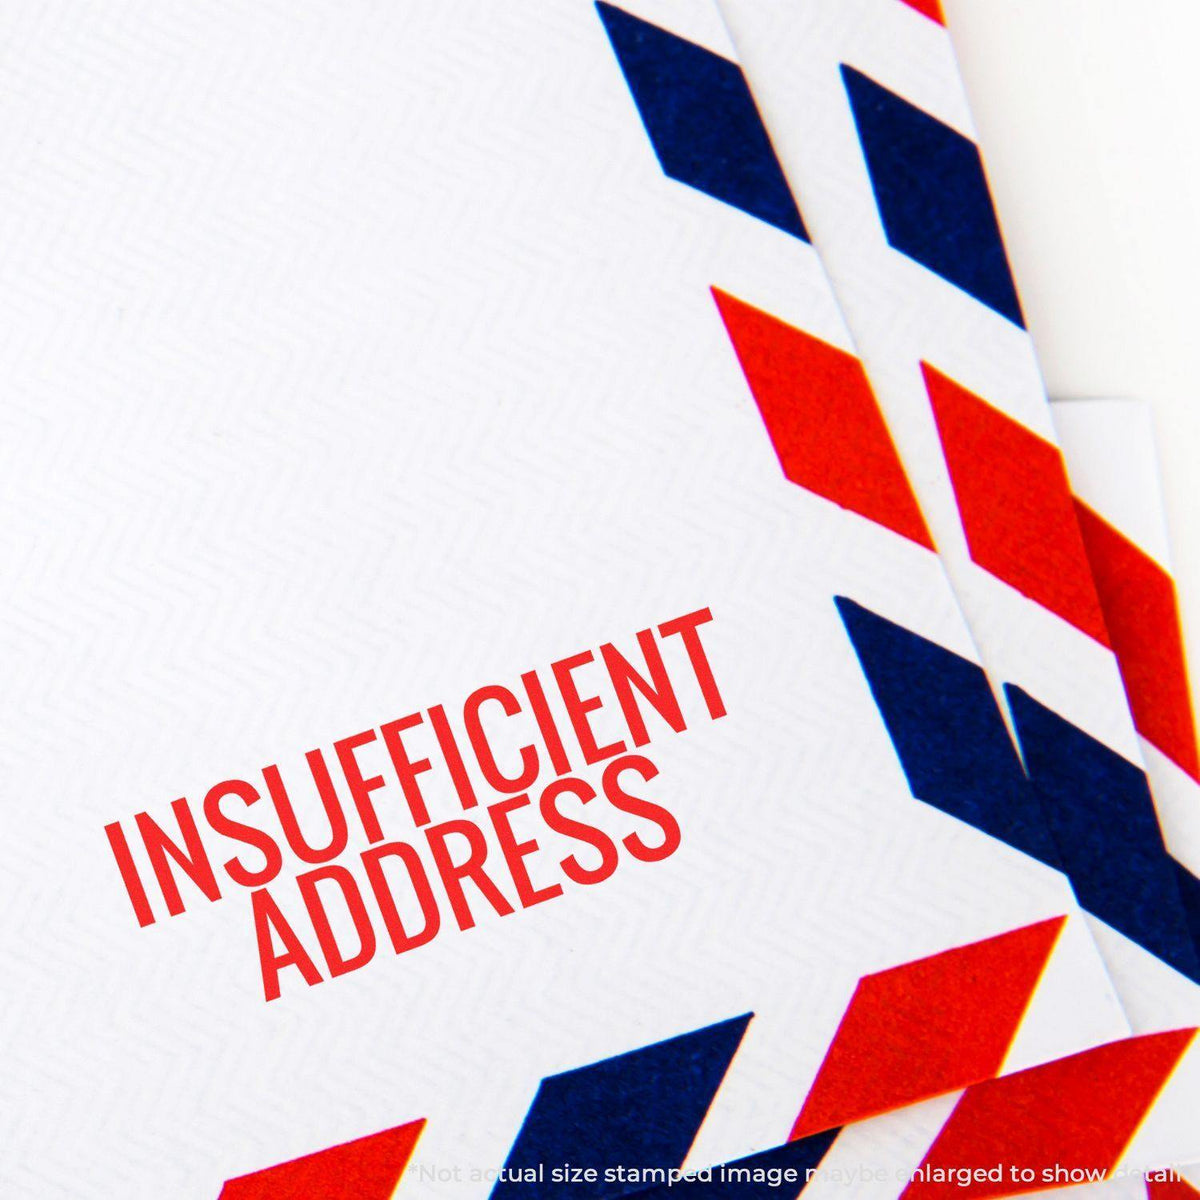 In Use Insufficient Address Rubber Stamp Image